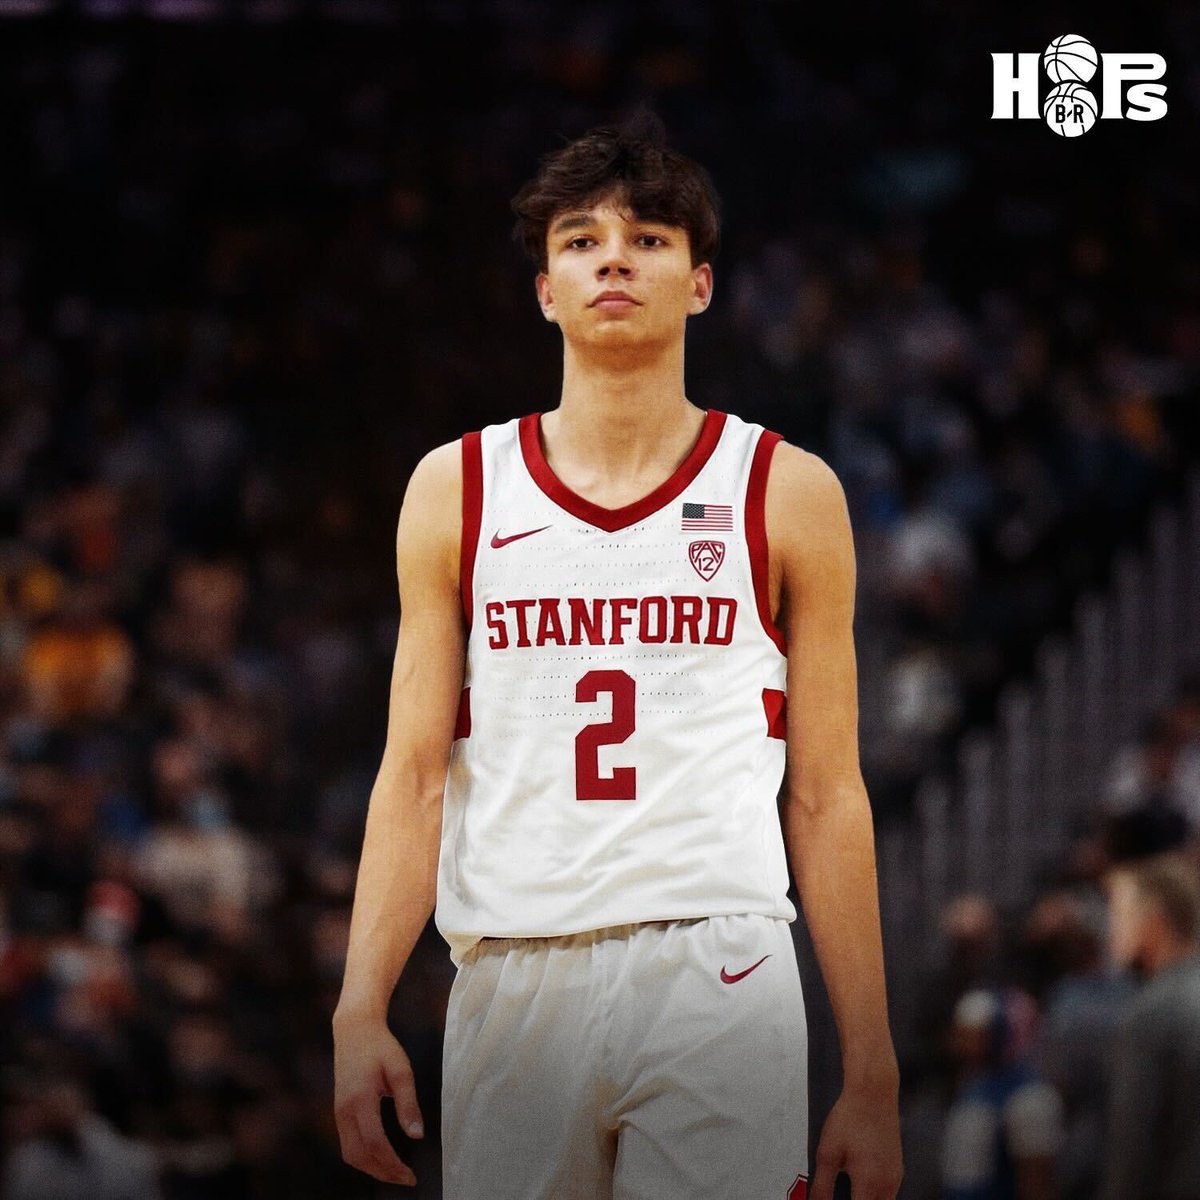 2023 Five-star recruit Andrej Stojakovic, the son of NBA champion Peja, has committed to Stanford @brhoops